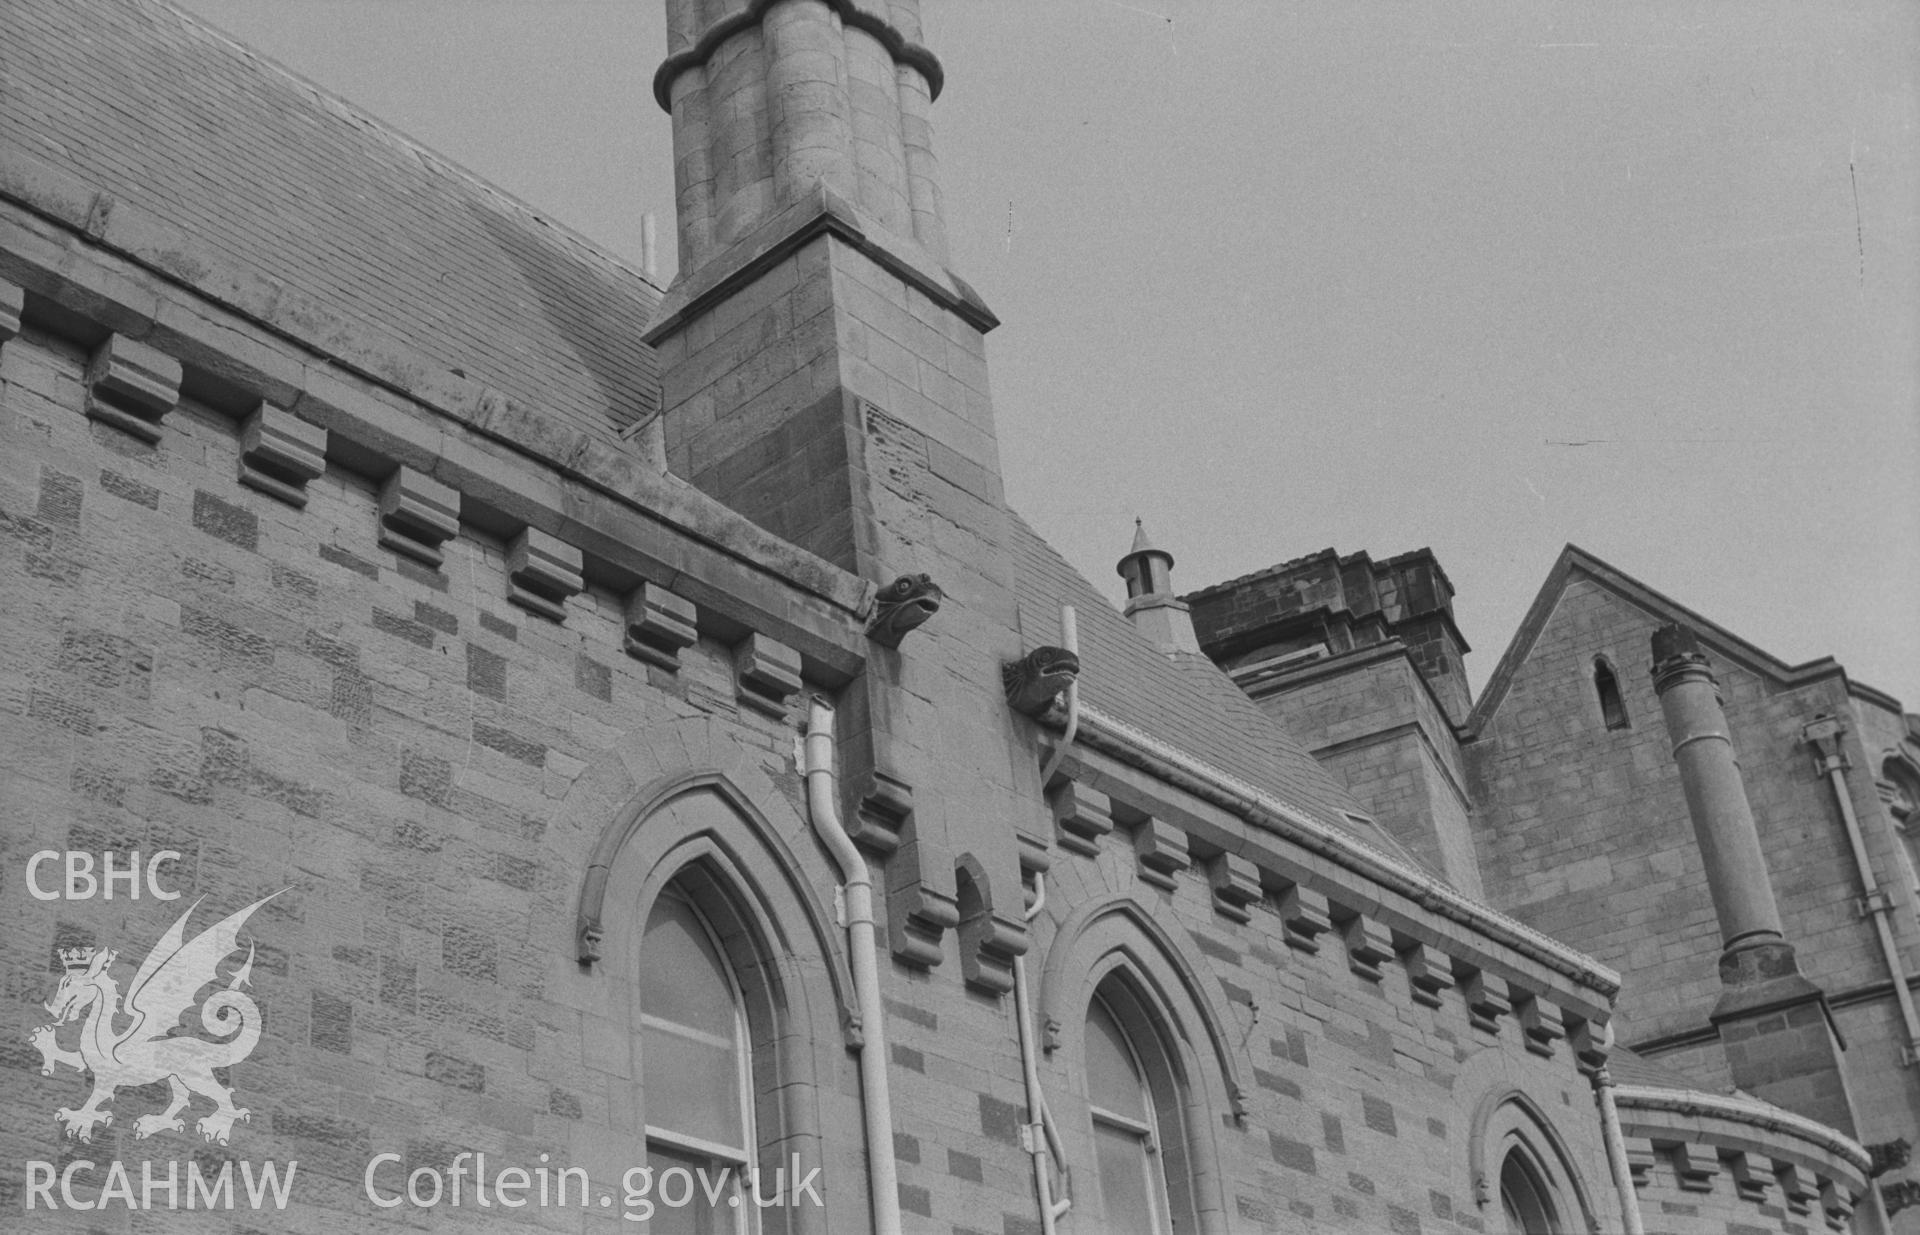 Digital copy of black & white negative showing reptilian gargoyles in sandstone on wall of Aberystwyth Old College, on the side opposite St Michael's churchyard. Photographed by Arthur O. Chater on 13th April 1967, looking north from Grid Ref SN 581 817.